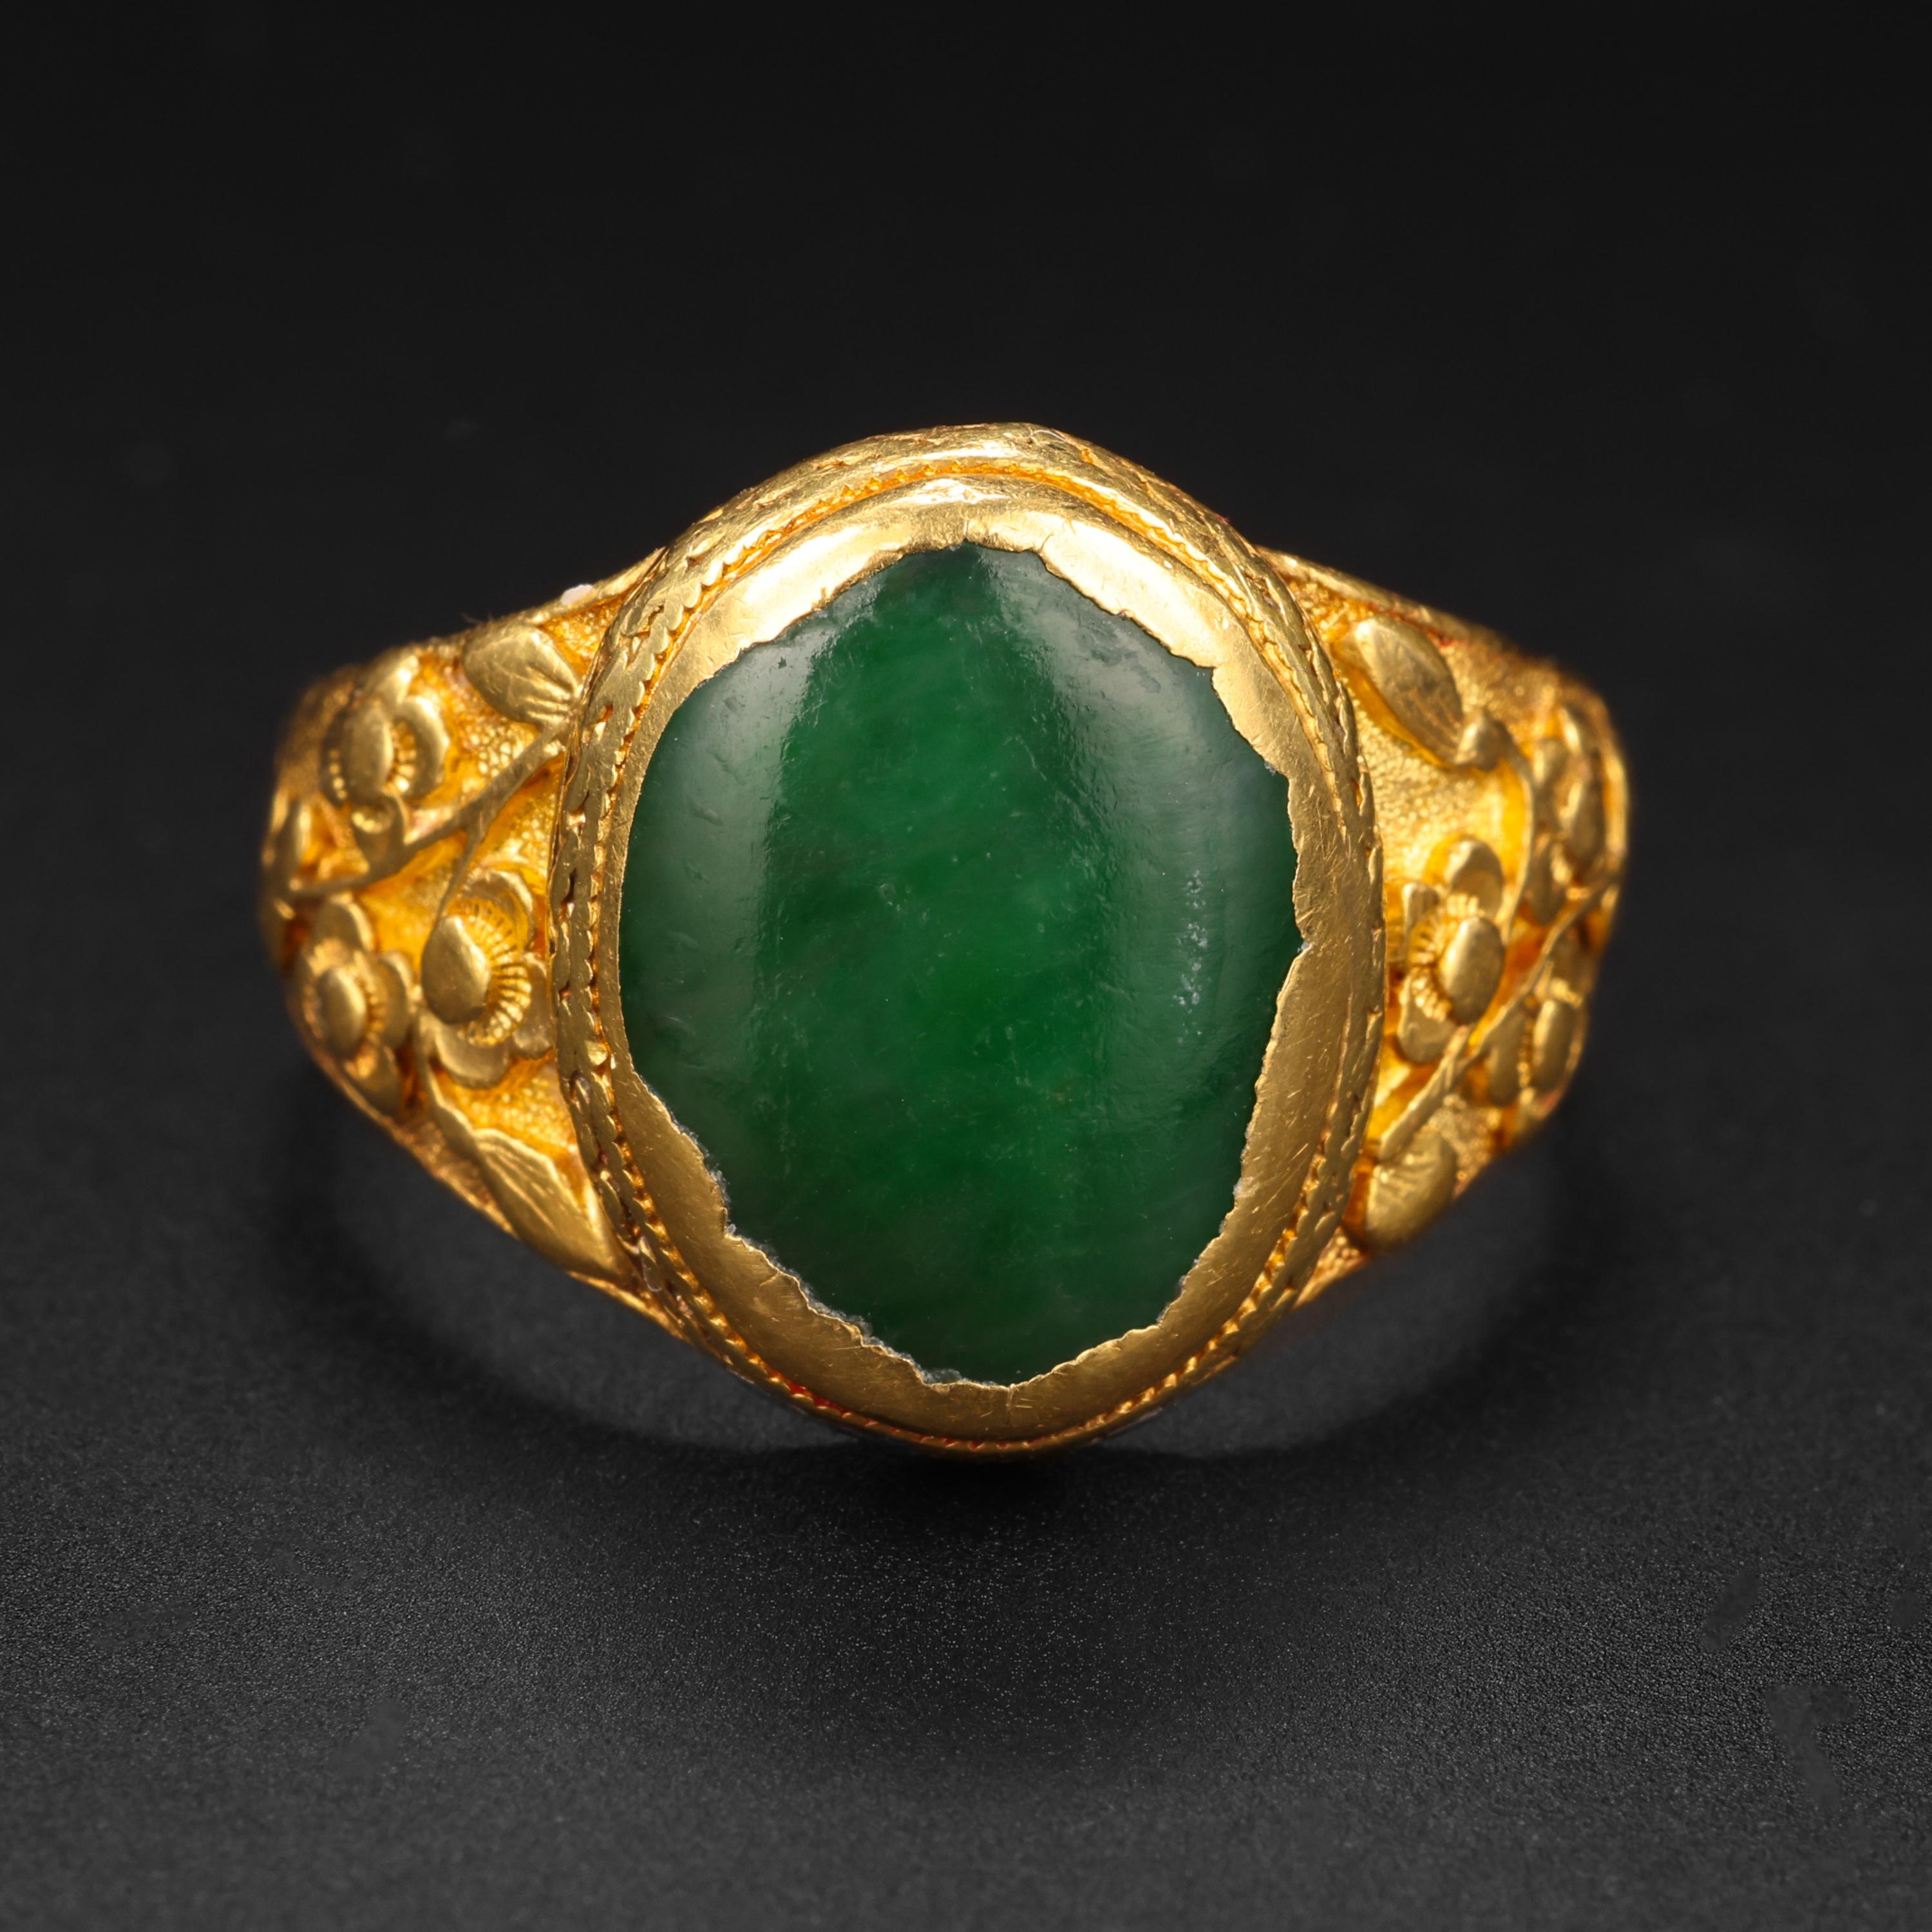 This impossibly rich 22K yellow gold and jade ring was created by hand near the end of the 19th century in China. Featuring deeply carved shoulders depicting highly detailed flowers; the recessed background has a stippled appearance. The